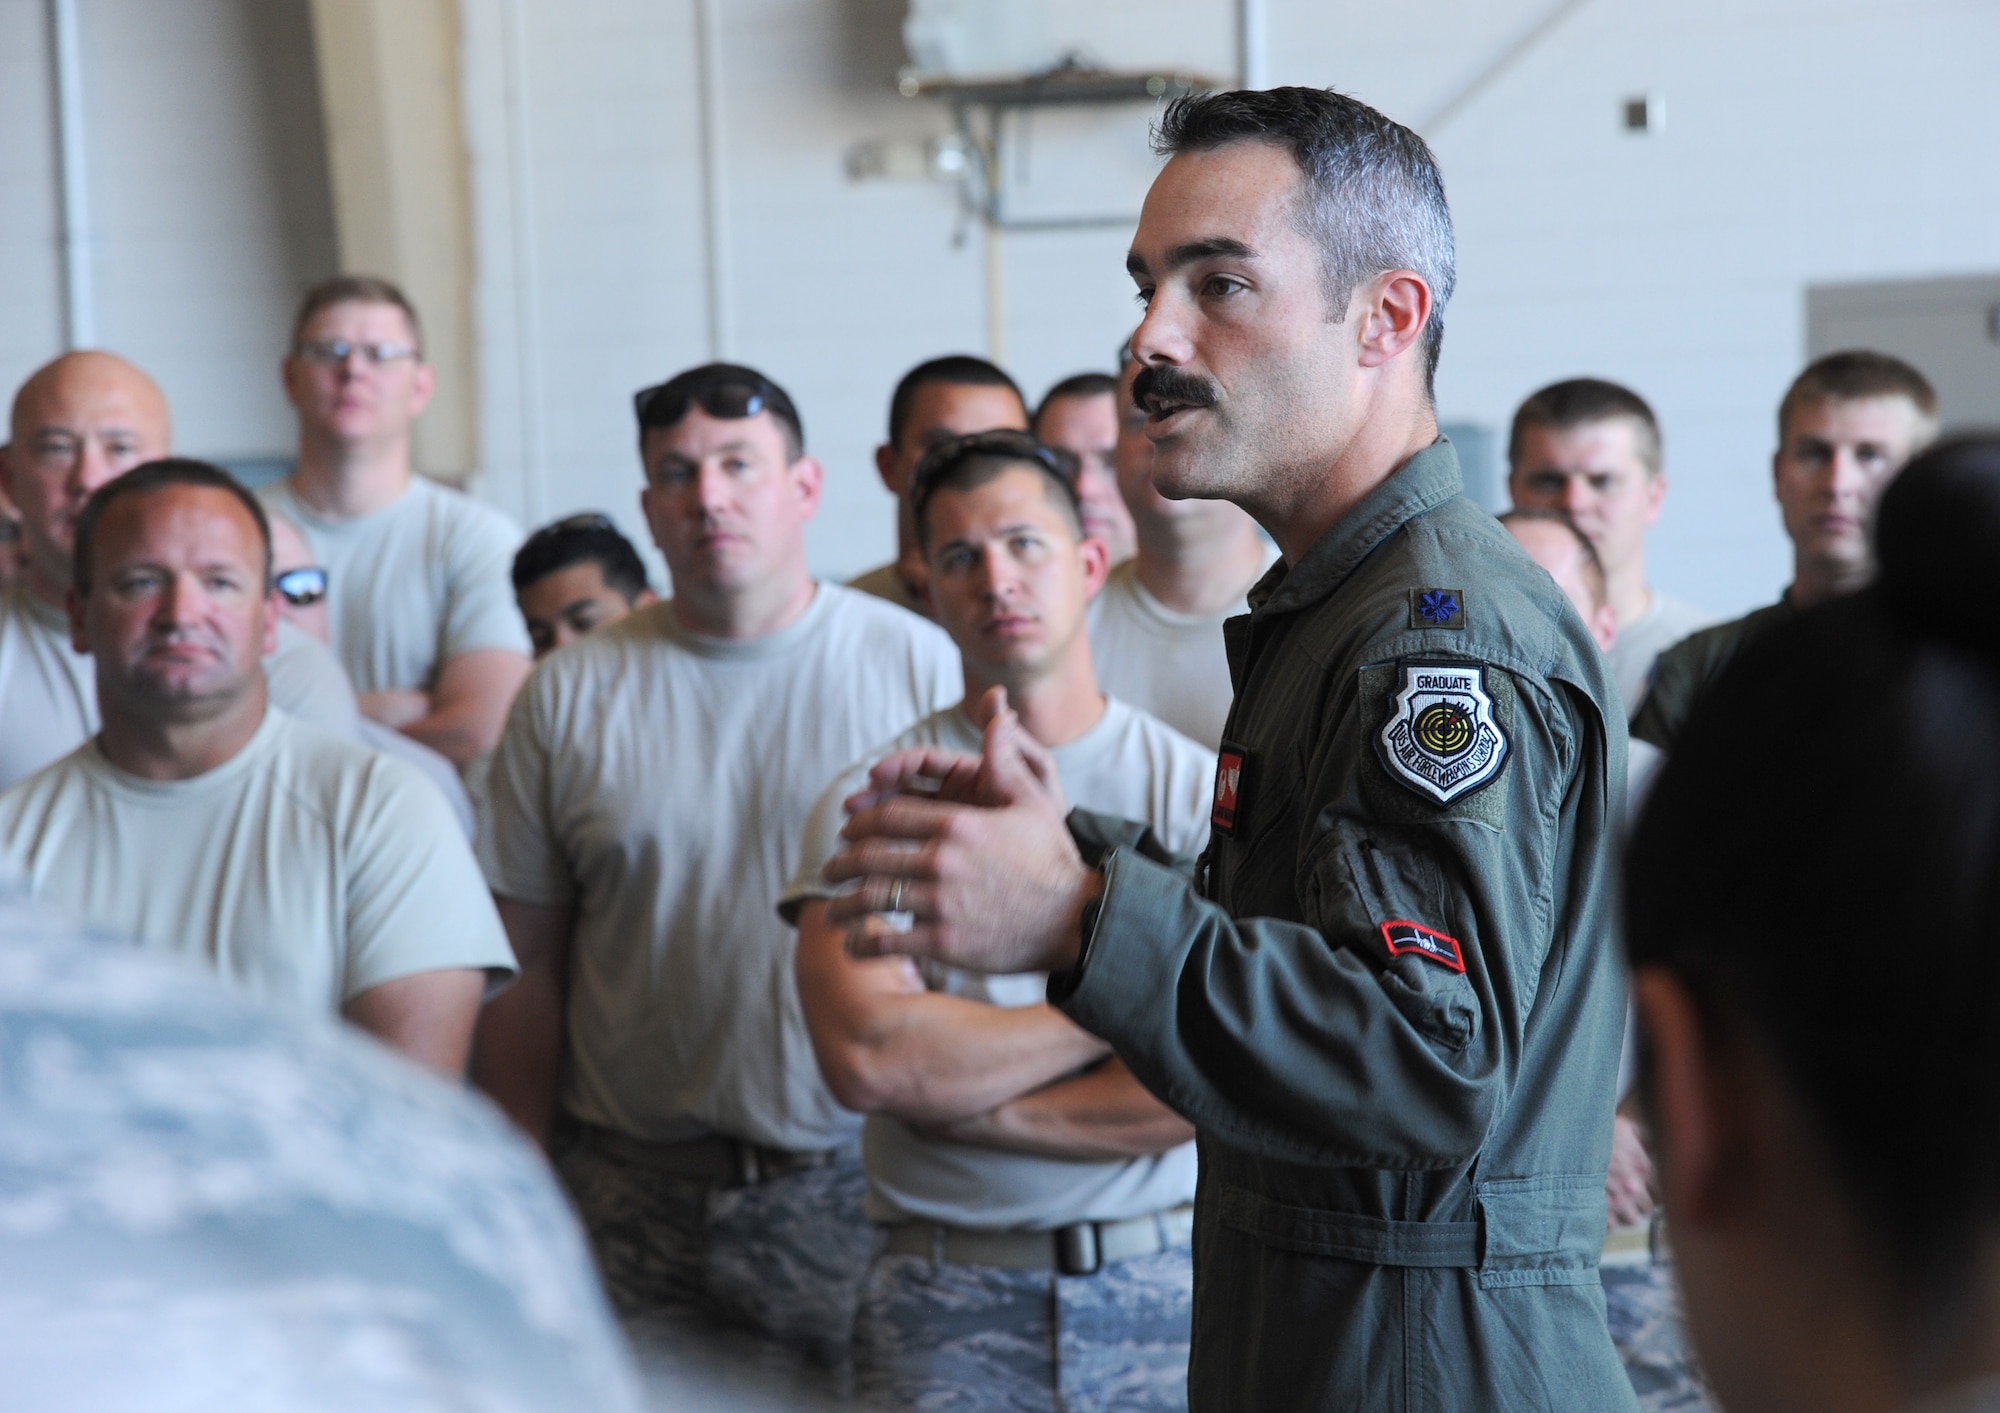 Oregon Air National Guard Lt. Col. Aaron Mathena, 123rd Fighter Squadron commander, spends time thanking and providing thoughtful feedback to members of the 142nd Fighter Wing who spent the last three-weeks at Nellis Air Force Base, Nev., supporting the Weapons Instructor Course.